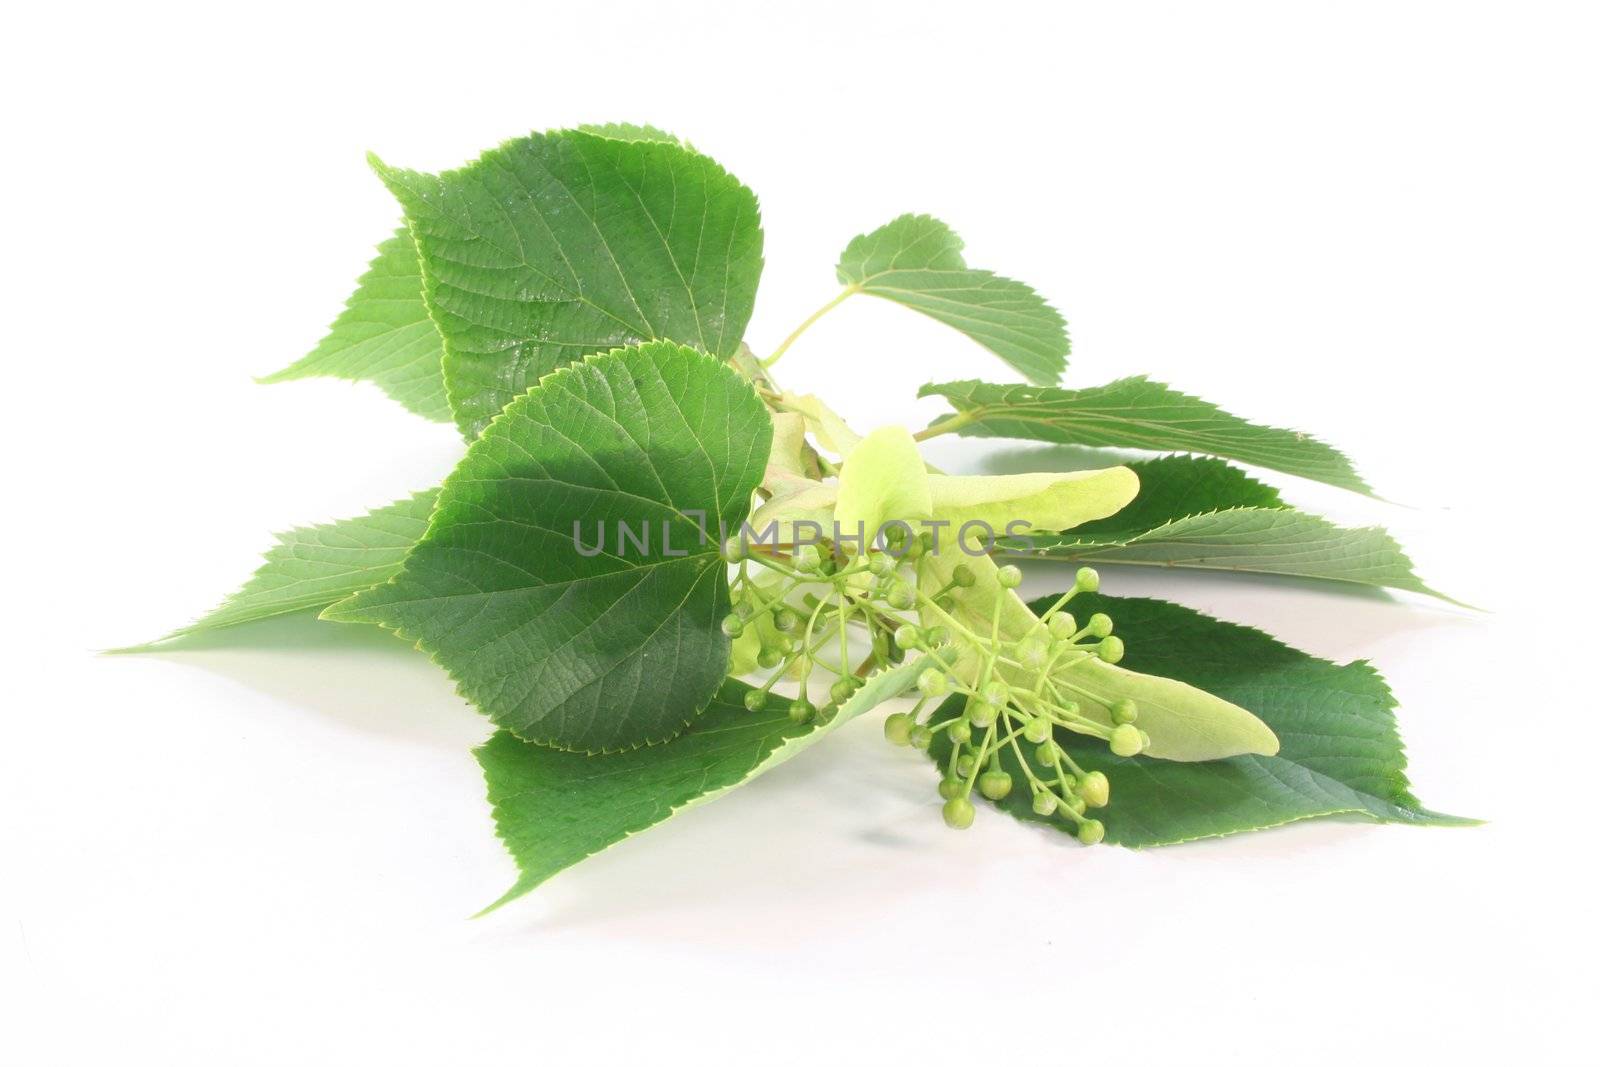 Linden flowers by discovery